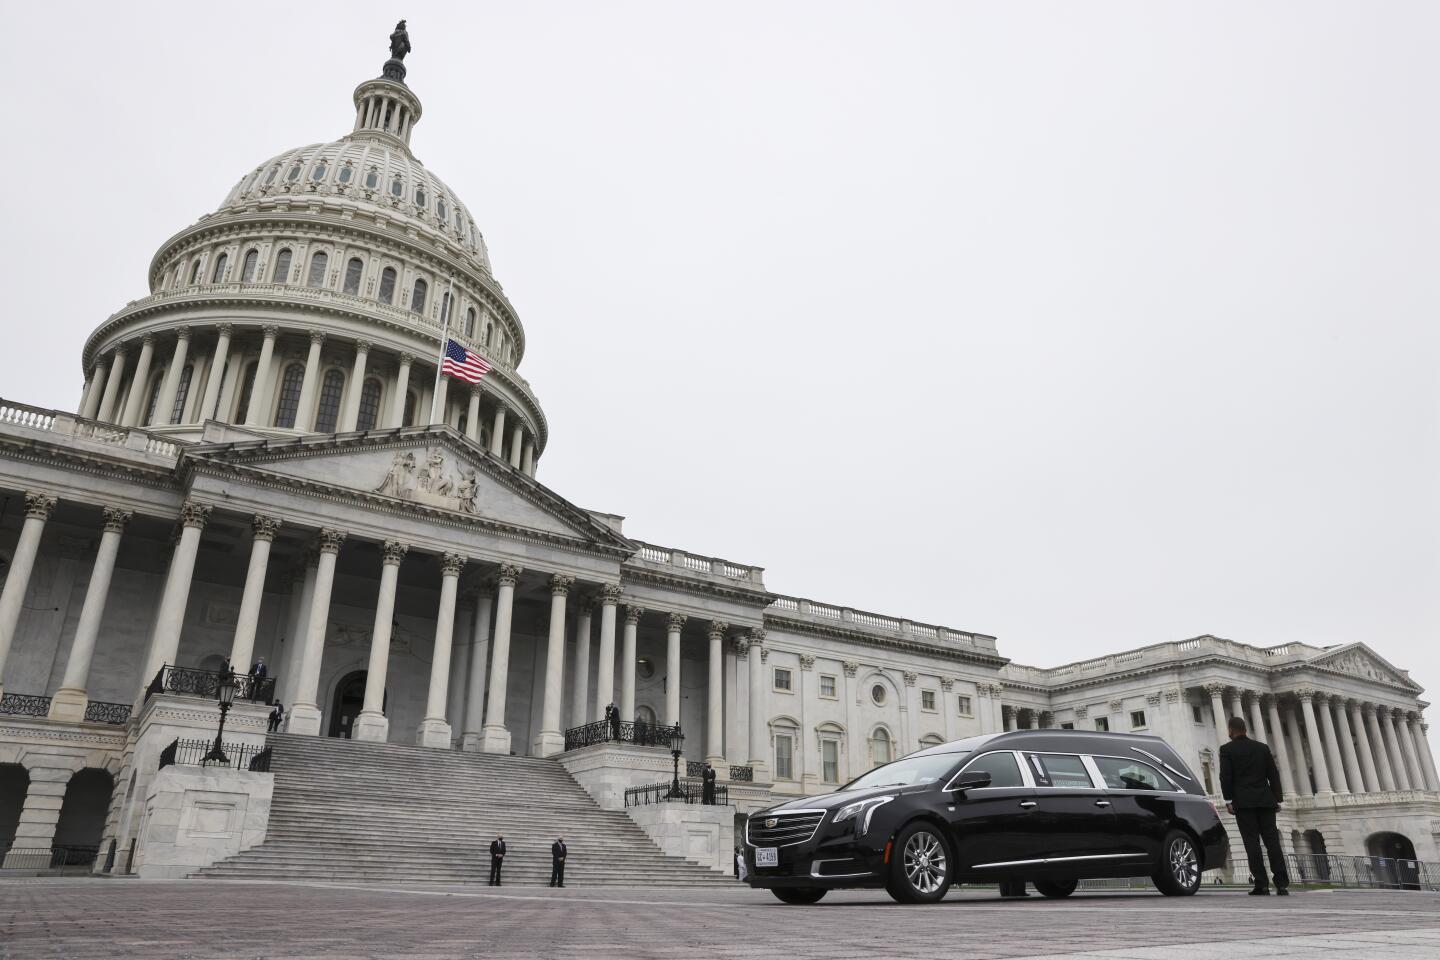 The hearse carrying the casket of Justice Ruth Bader Ginsburg arrives at the U.S. Capitol